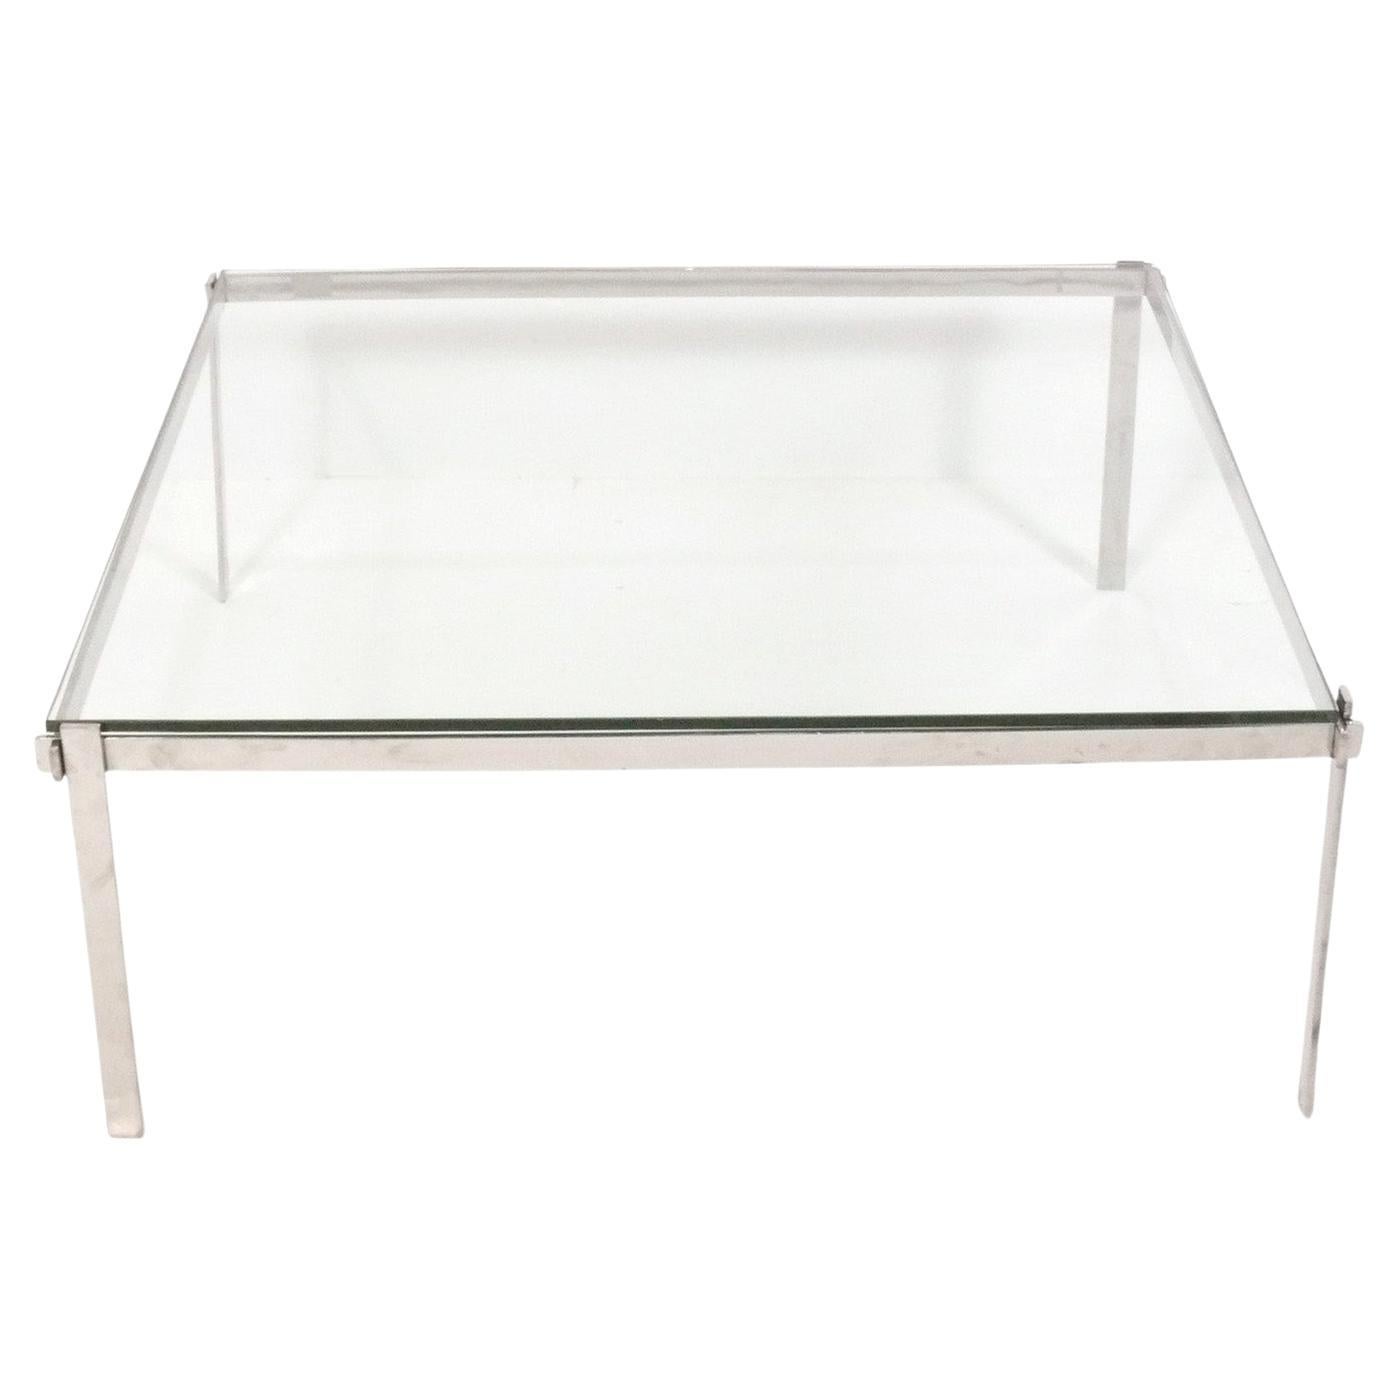 Clean Lined Architectural Chrome Coffee Table Mid Century Modern 